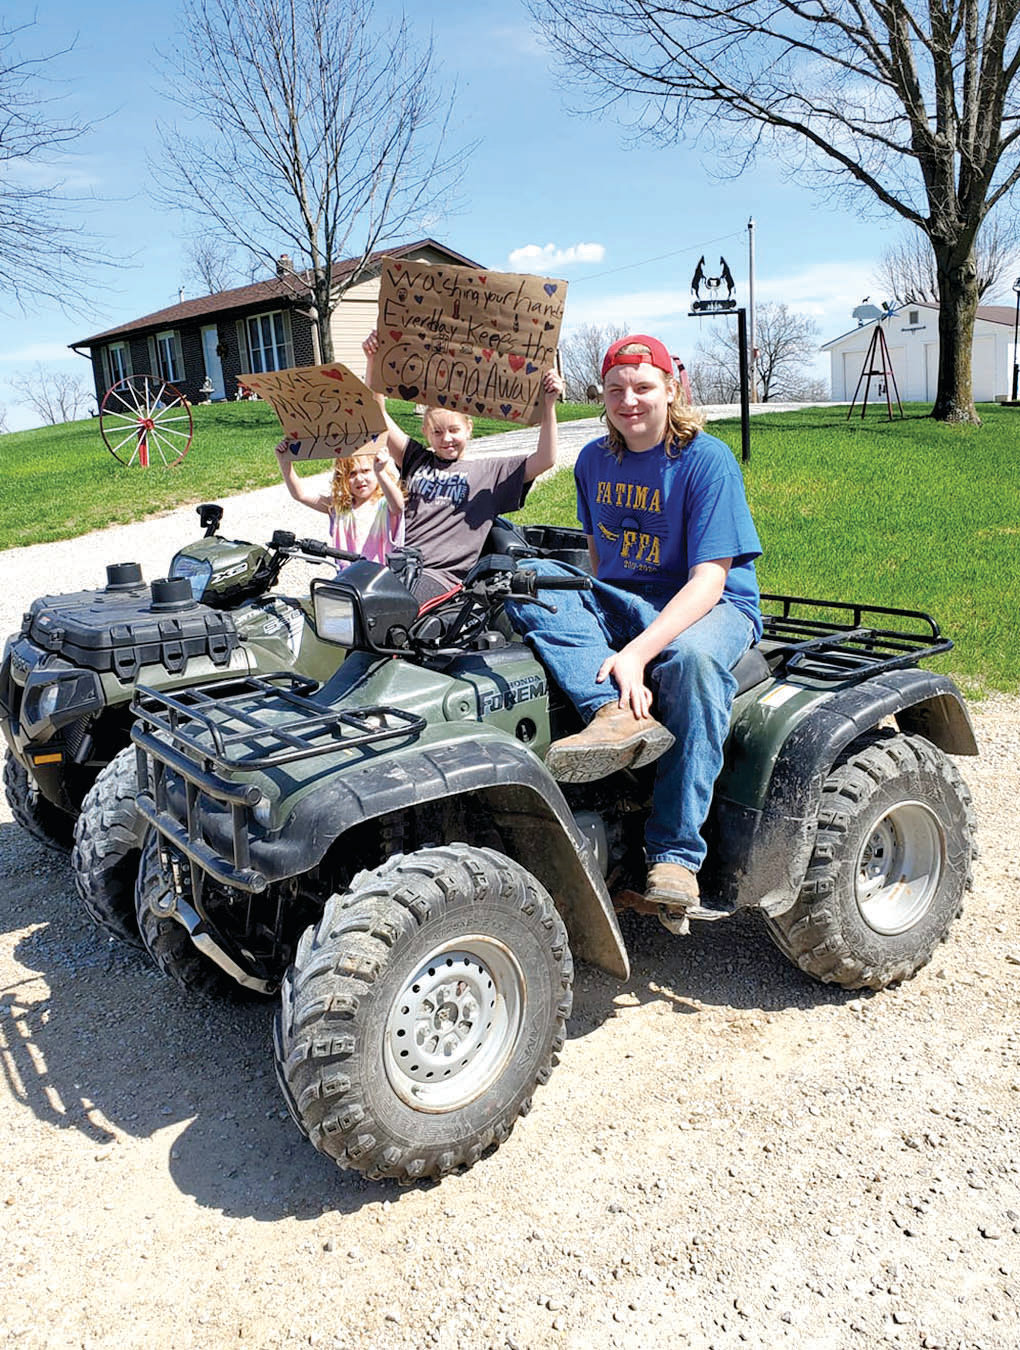 Ava, Riley and Jacob Buhr sit on their  ATV with signs during a recent Fatima teacher parade.